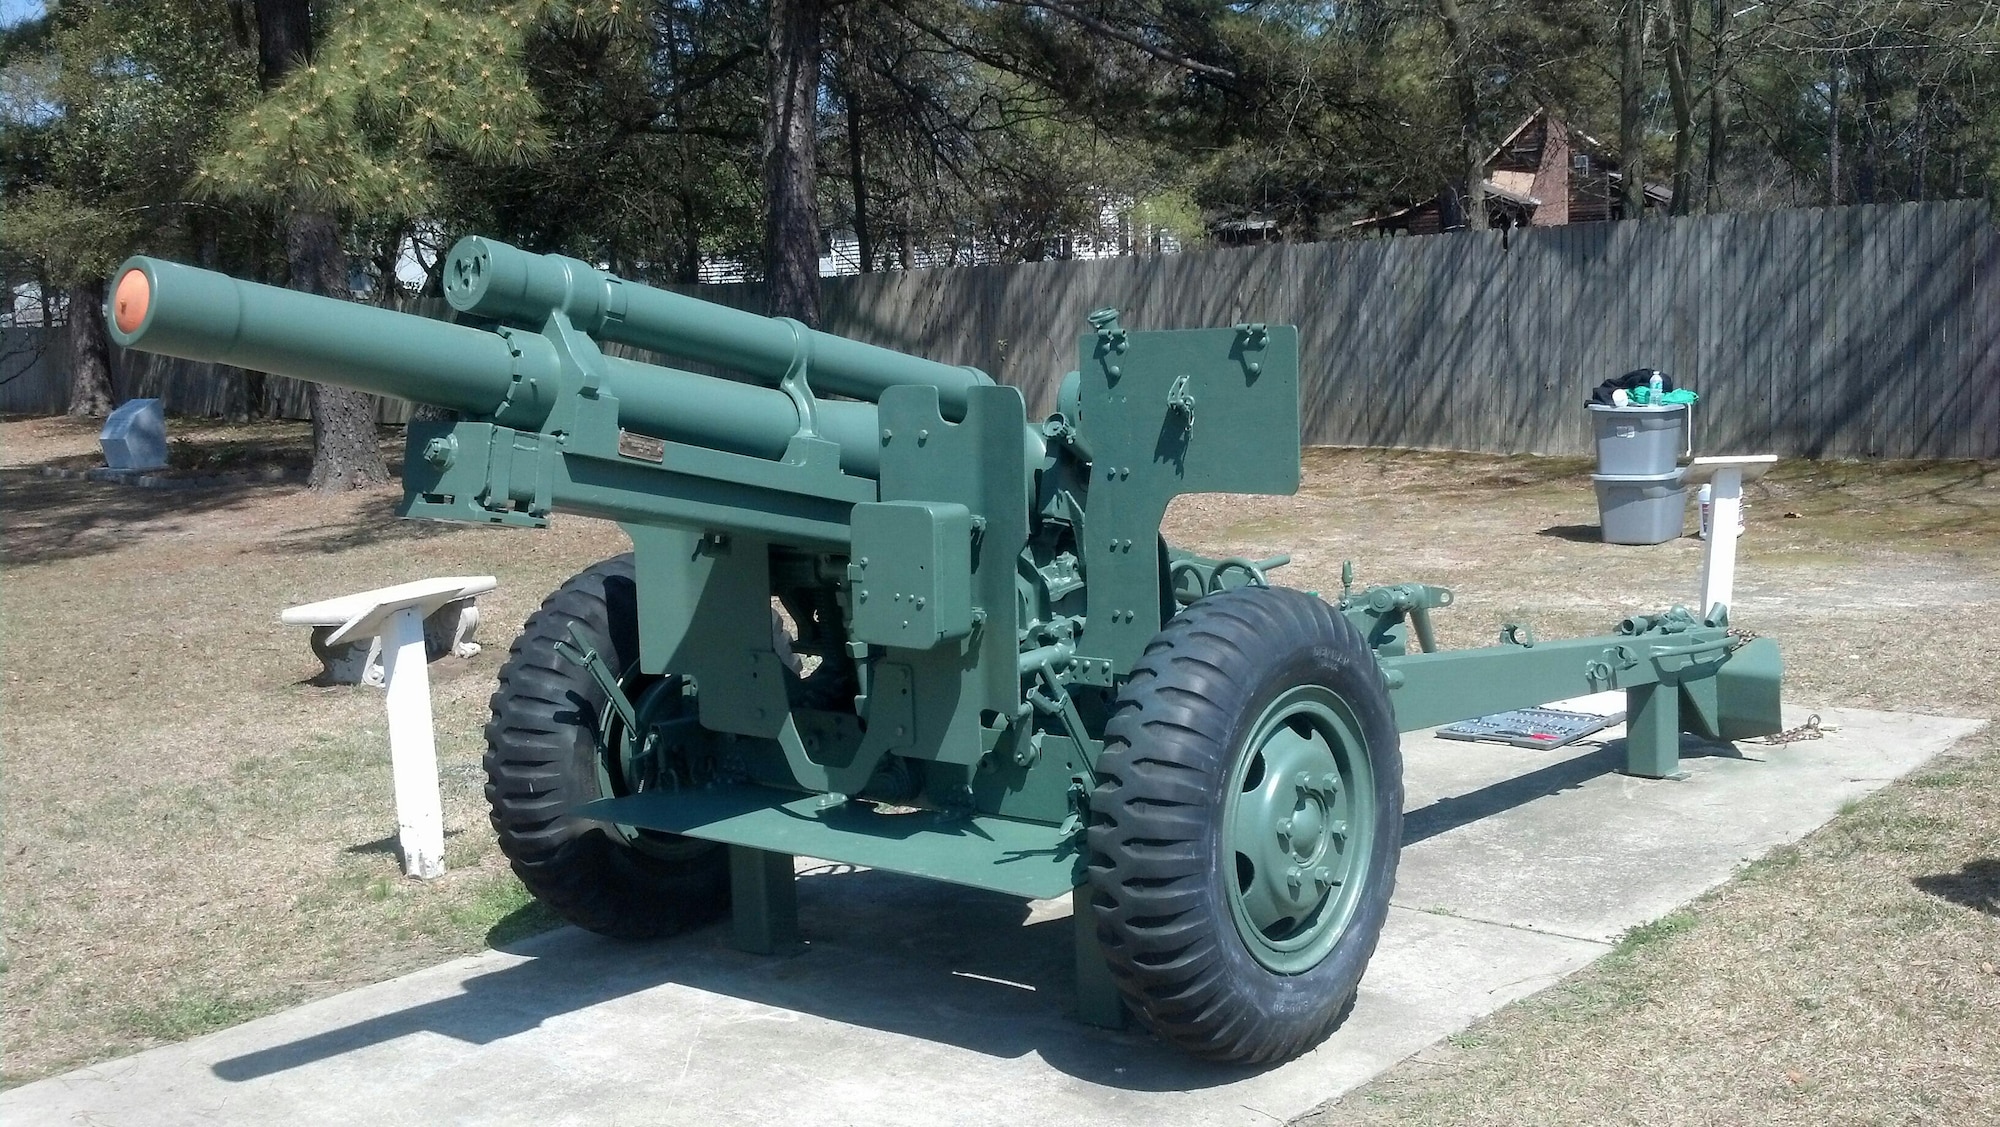 This World War II Howitzer 105 millimeter cannon located at the Veteran’s Memorial Park in Hope Mills, N.C. was refurbished by volunteers from the 440th Maintenance Squadron, Junior Reserve Officer Training Corps. and civilians,. The Howitzer cannon weighs 4,880 pounds and has a firing range of 14,500 meters. (U.S. Air Force photo/Senior Airman Brandon Hamilton)